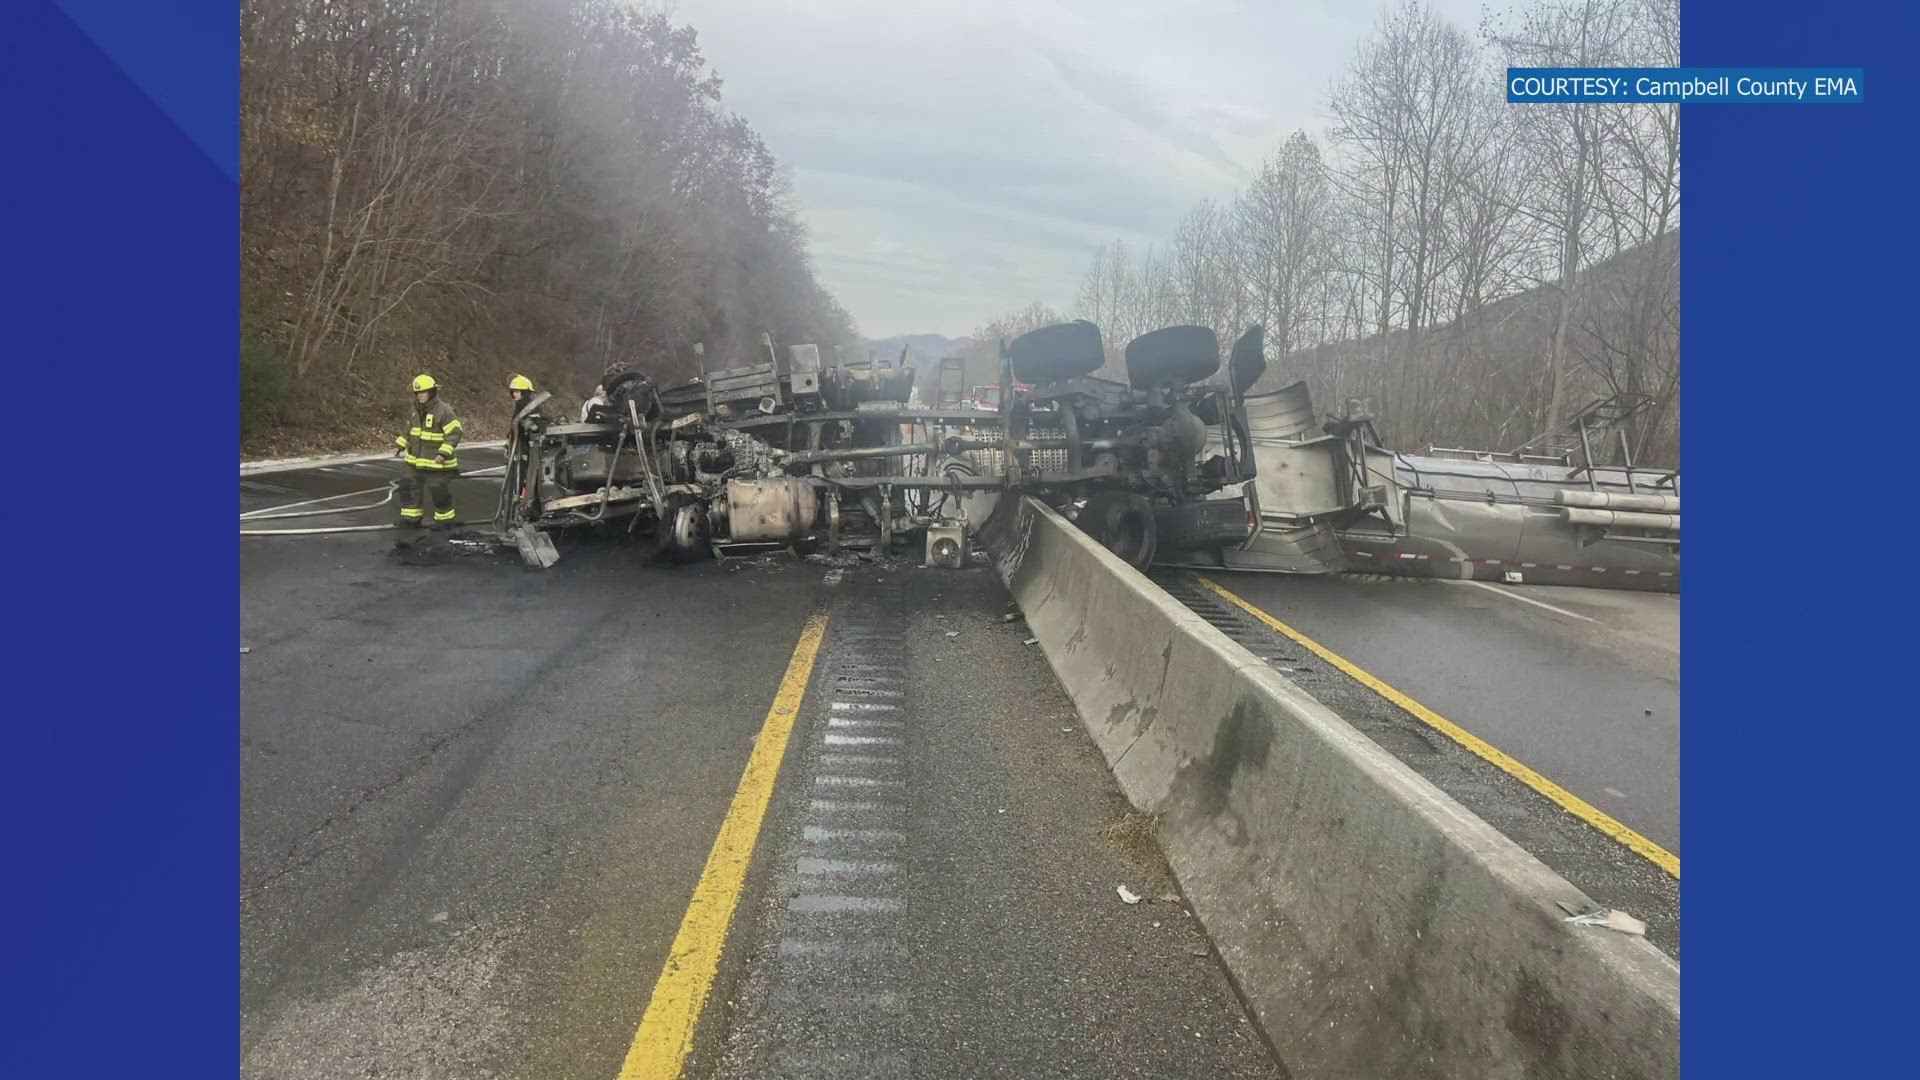 The Tennessee Department of Transportation said the overturned tractor was reported at around 3:32 p.m. Eastern Time, near Jellico.